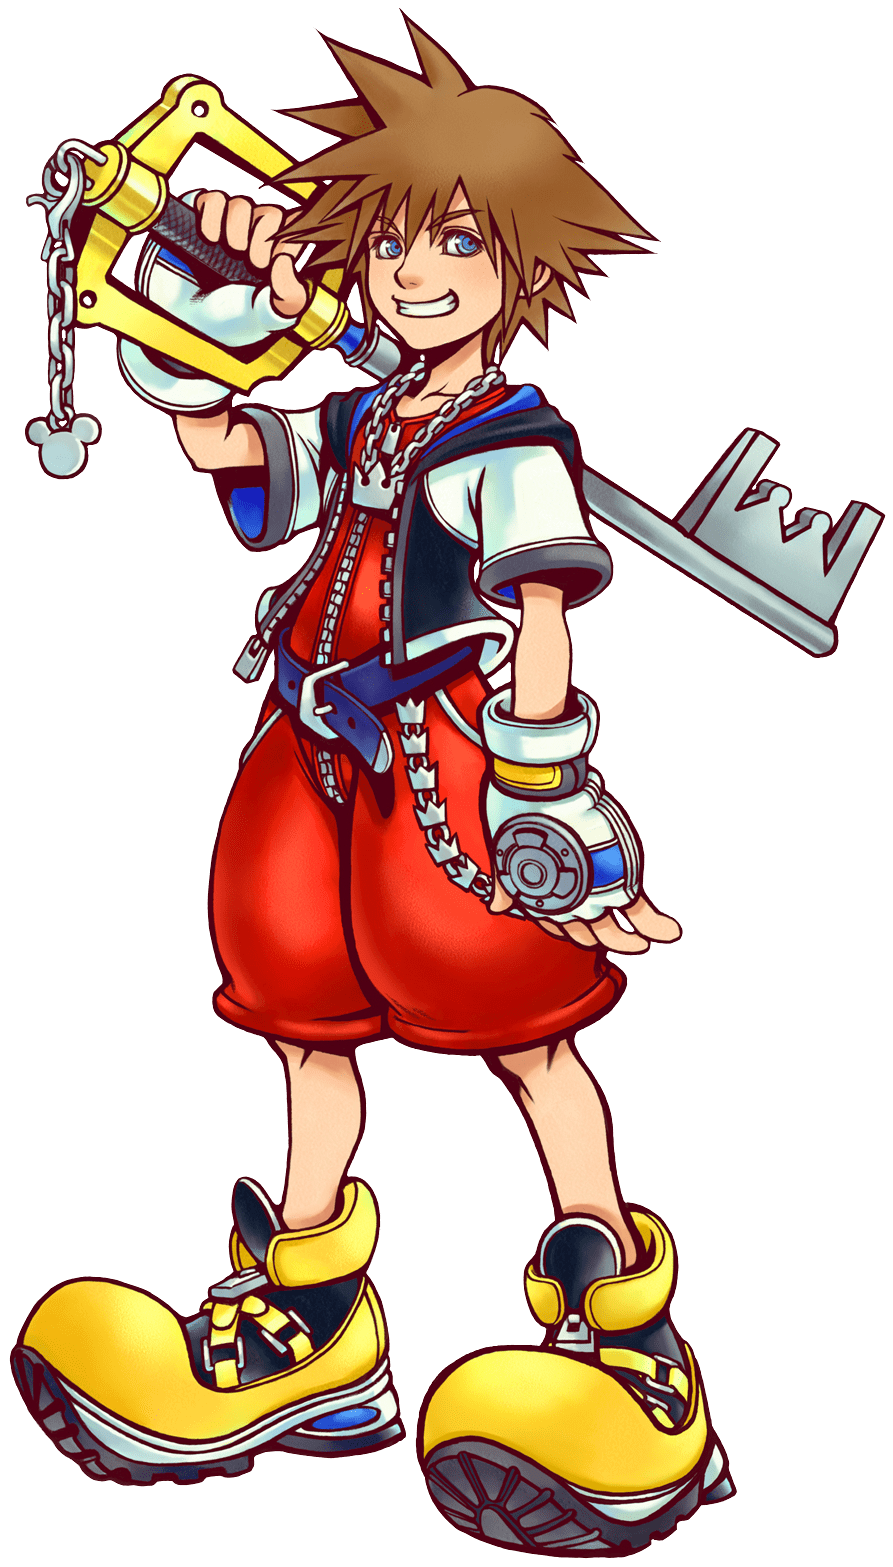 sora with keyblade from game Kingdom Hearts